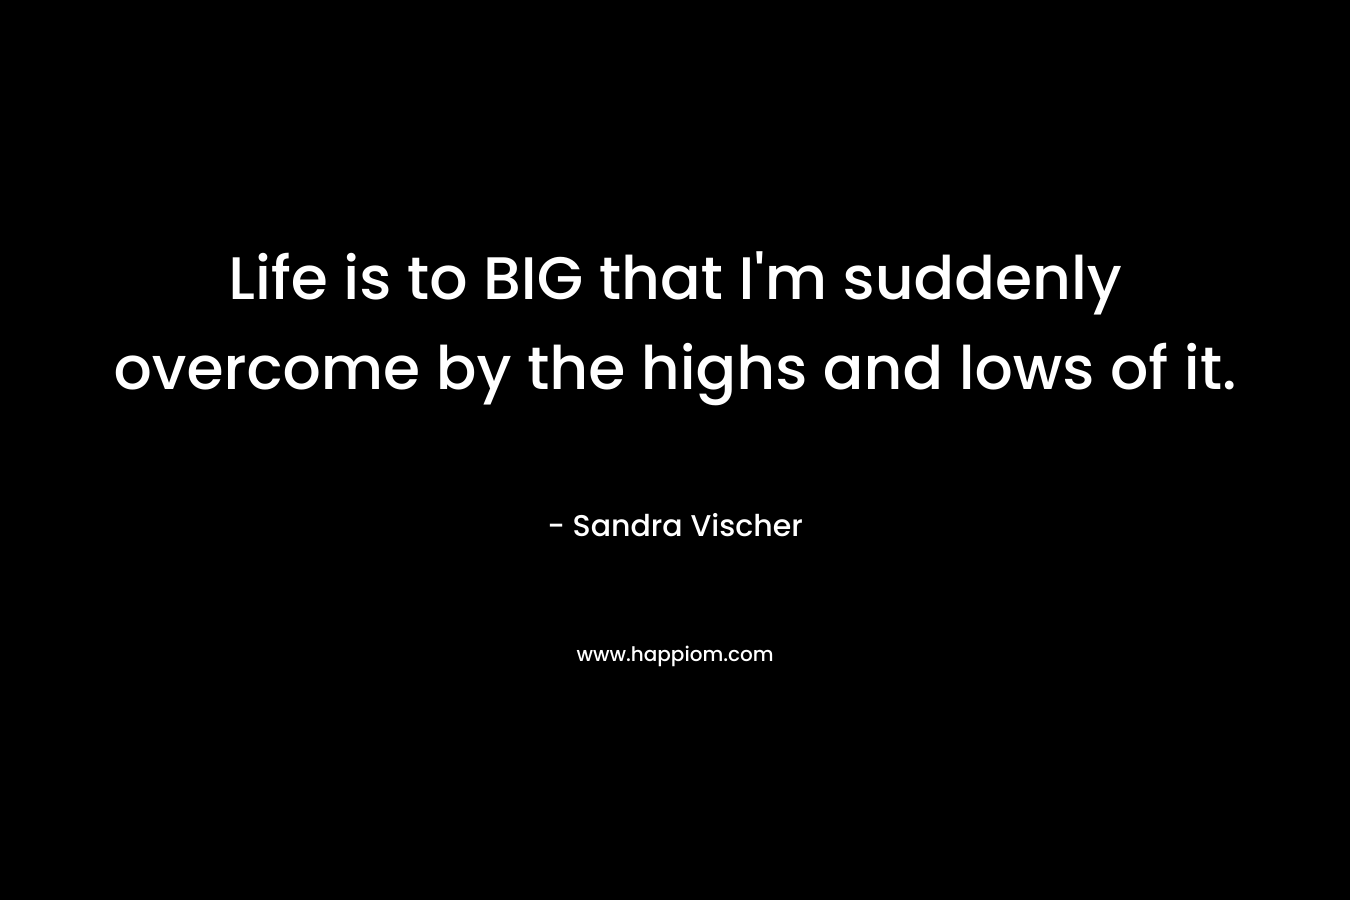 Life is to BIG that I’m suddenly overcome by the highs and lows of it. – Sandra Vischer